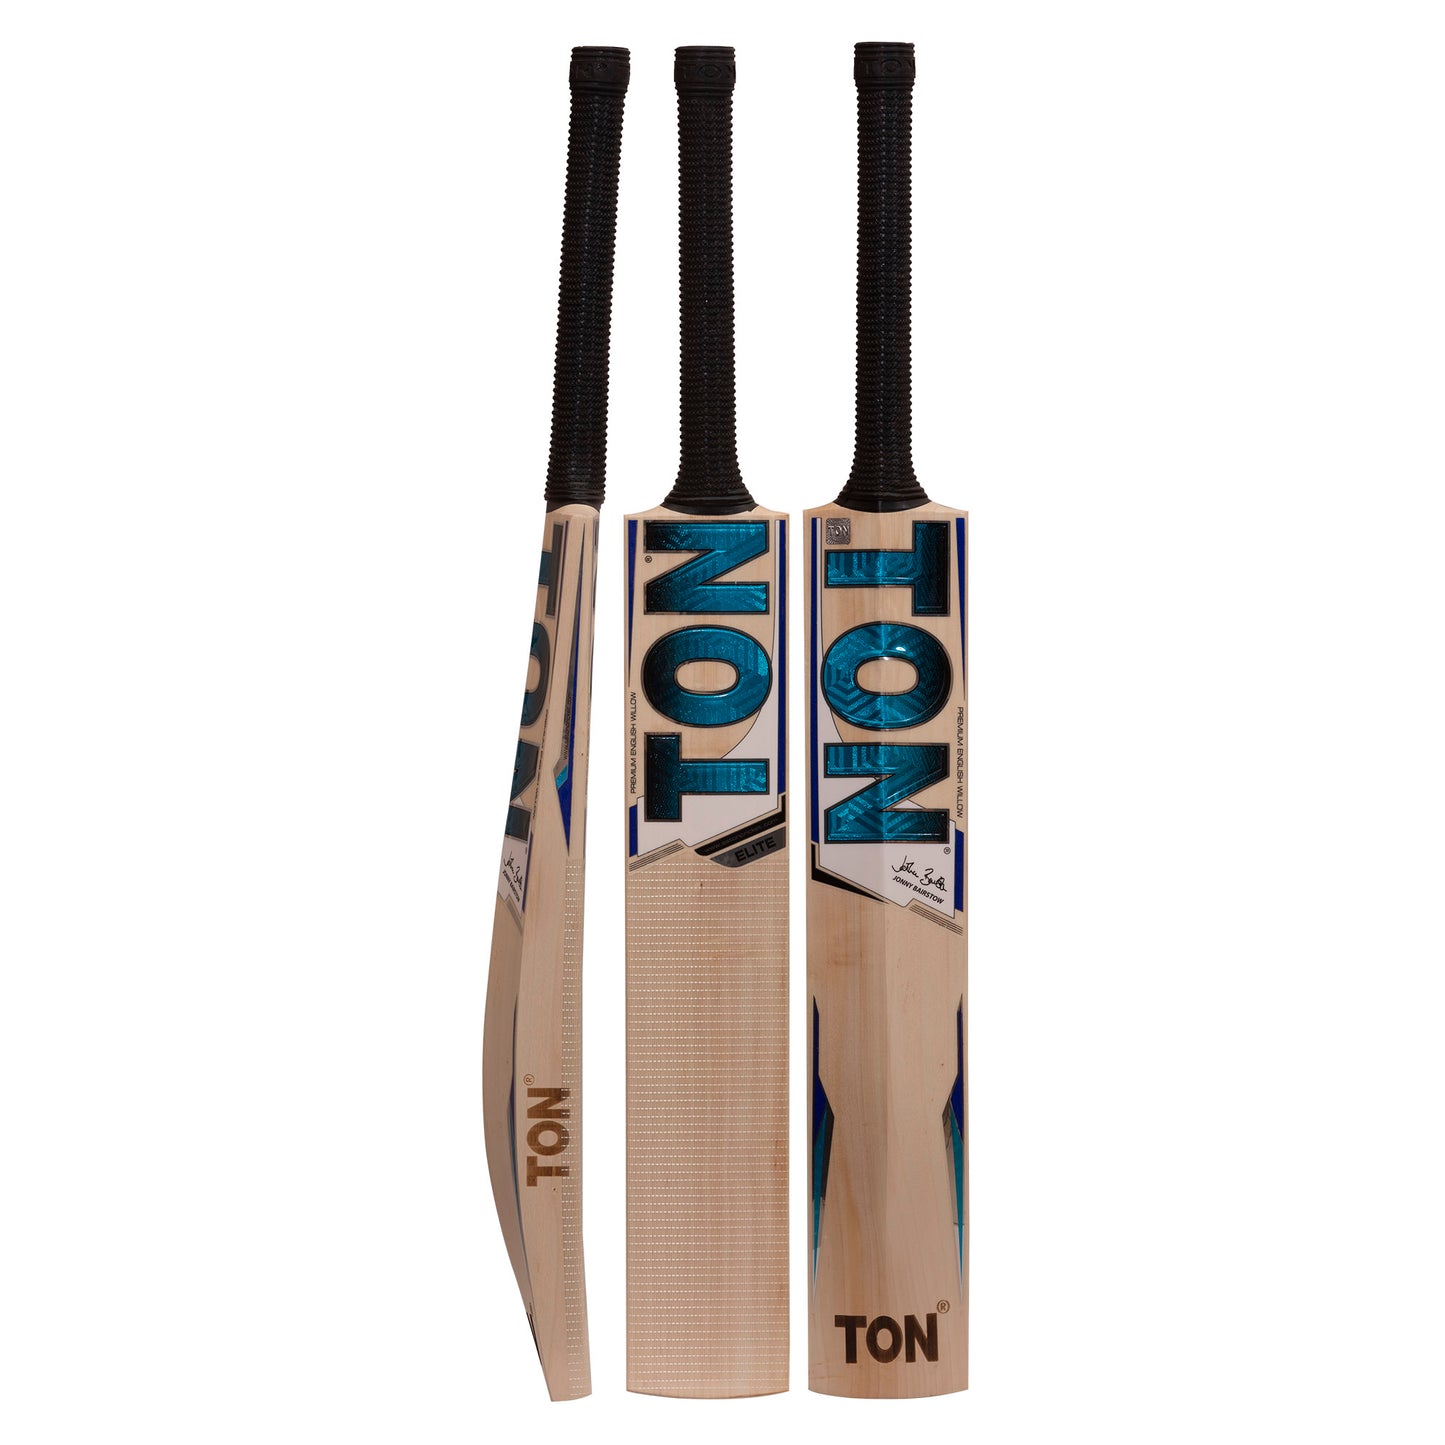 SS Ton English Willow Stunner Cricket Adult Kit, Complete Set with Accessories, Bat, Kit Bag, Gloves, Guards